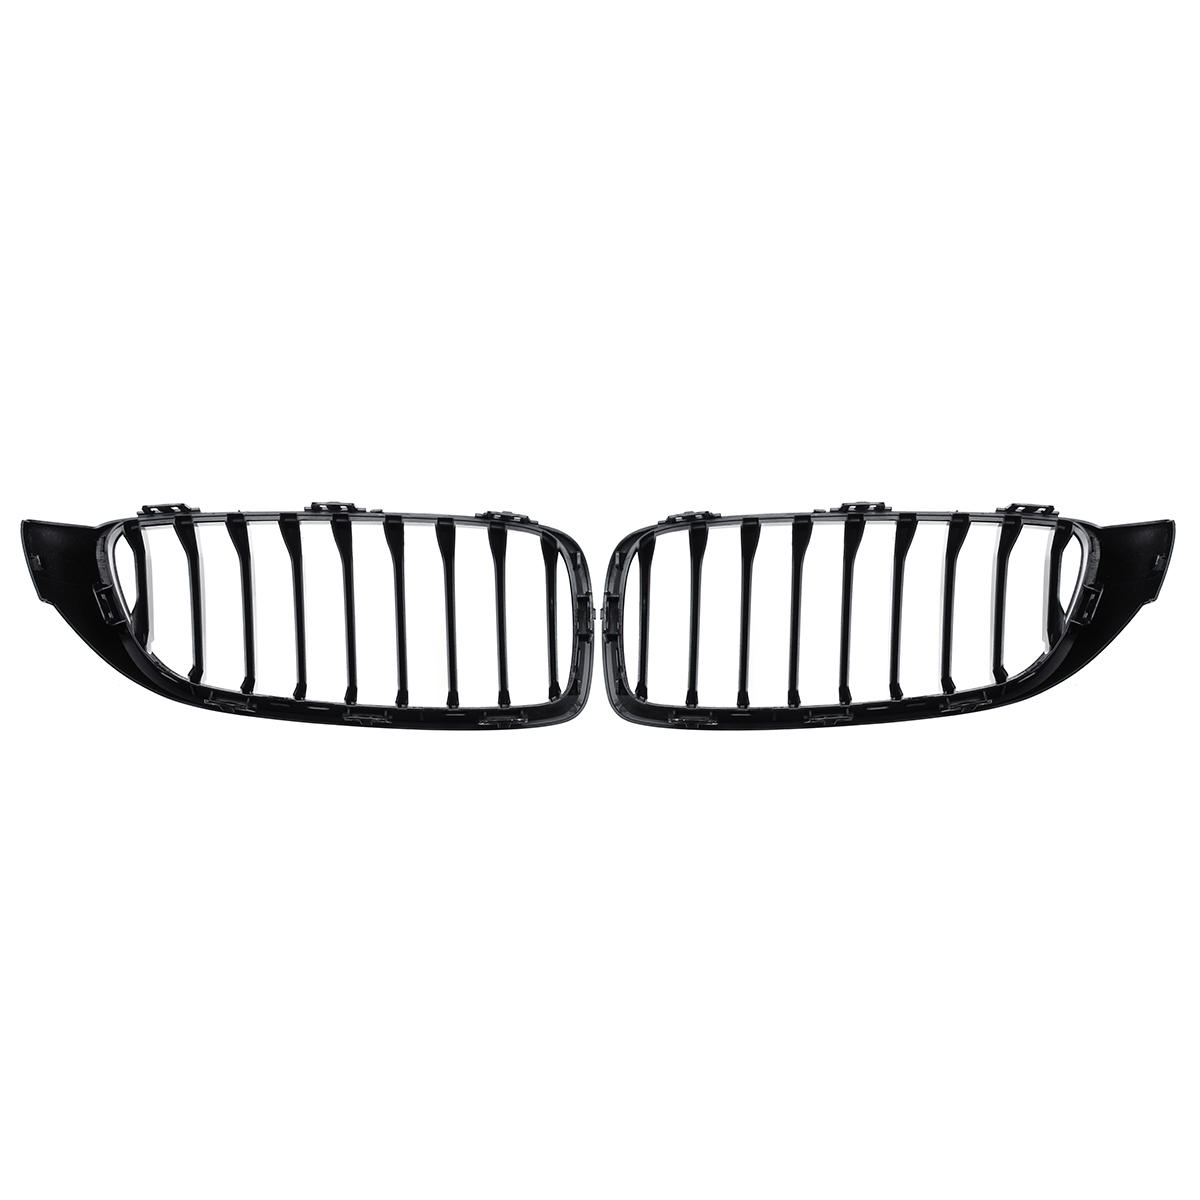 Car Gloss Black Kidney Grill Grille For BMW 4 Series F32 F33 F36 F82 Models Coupe